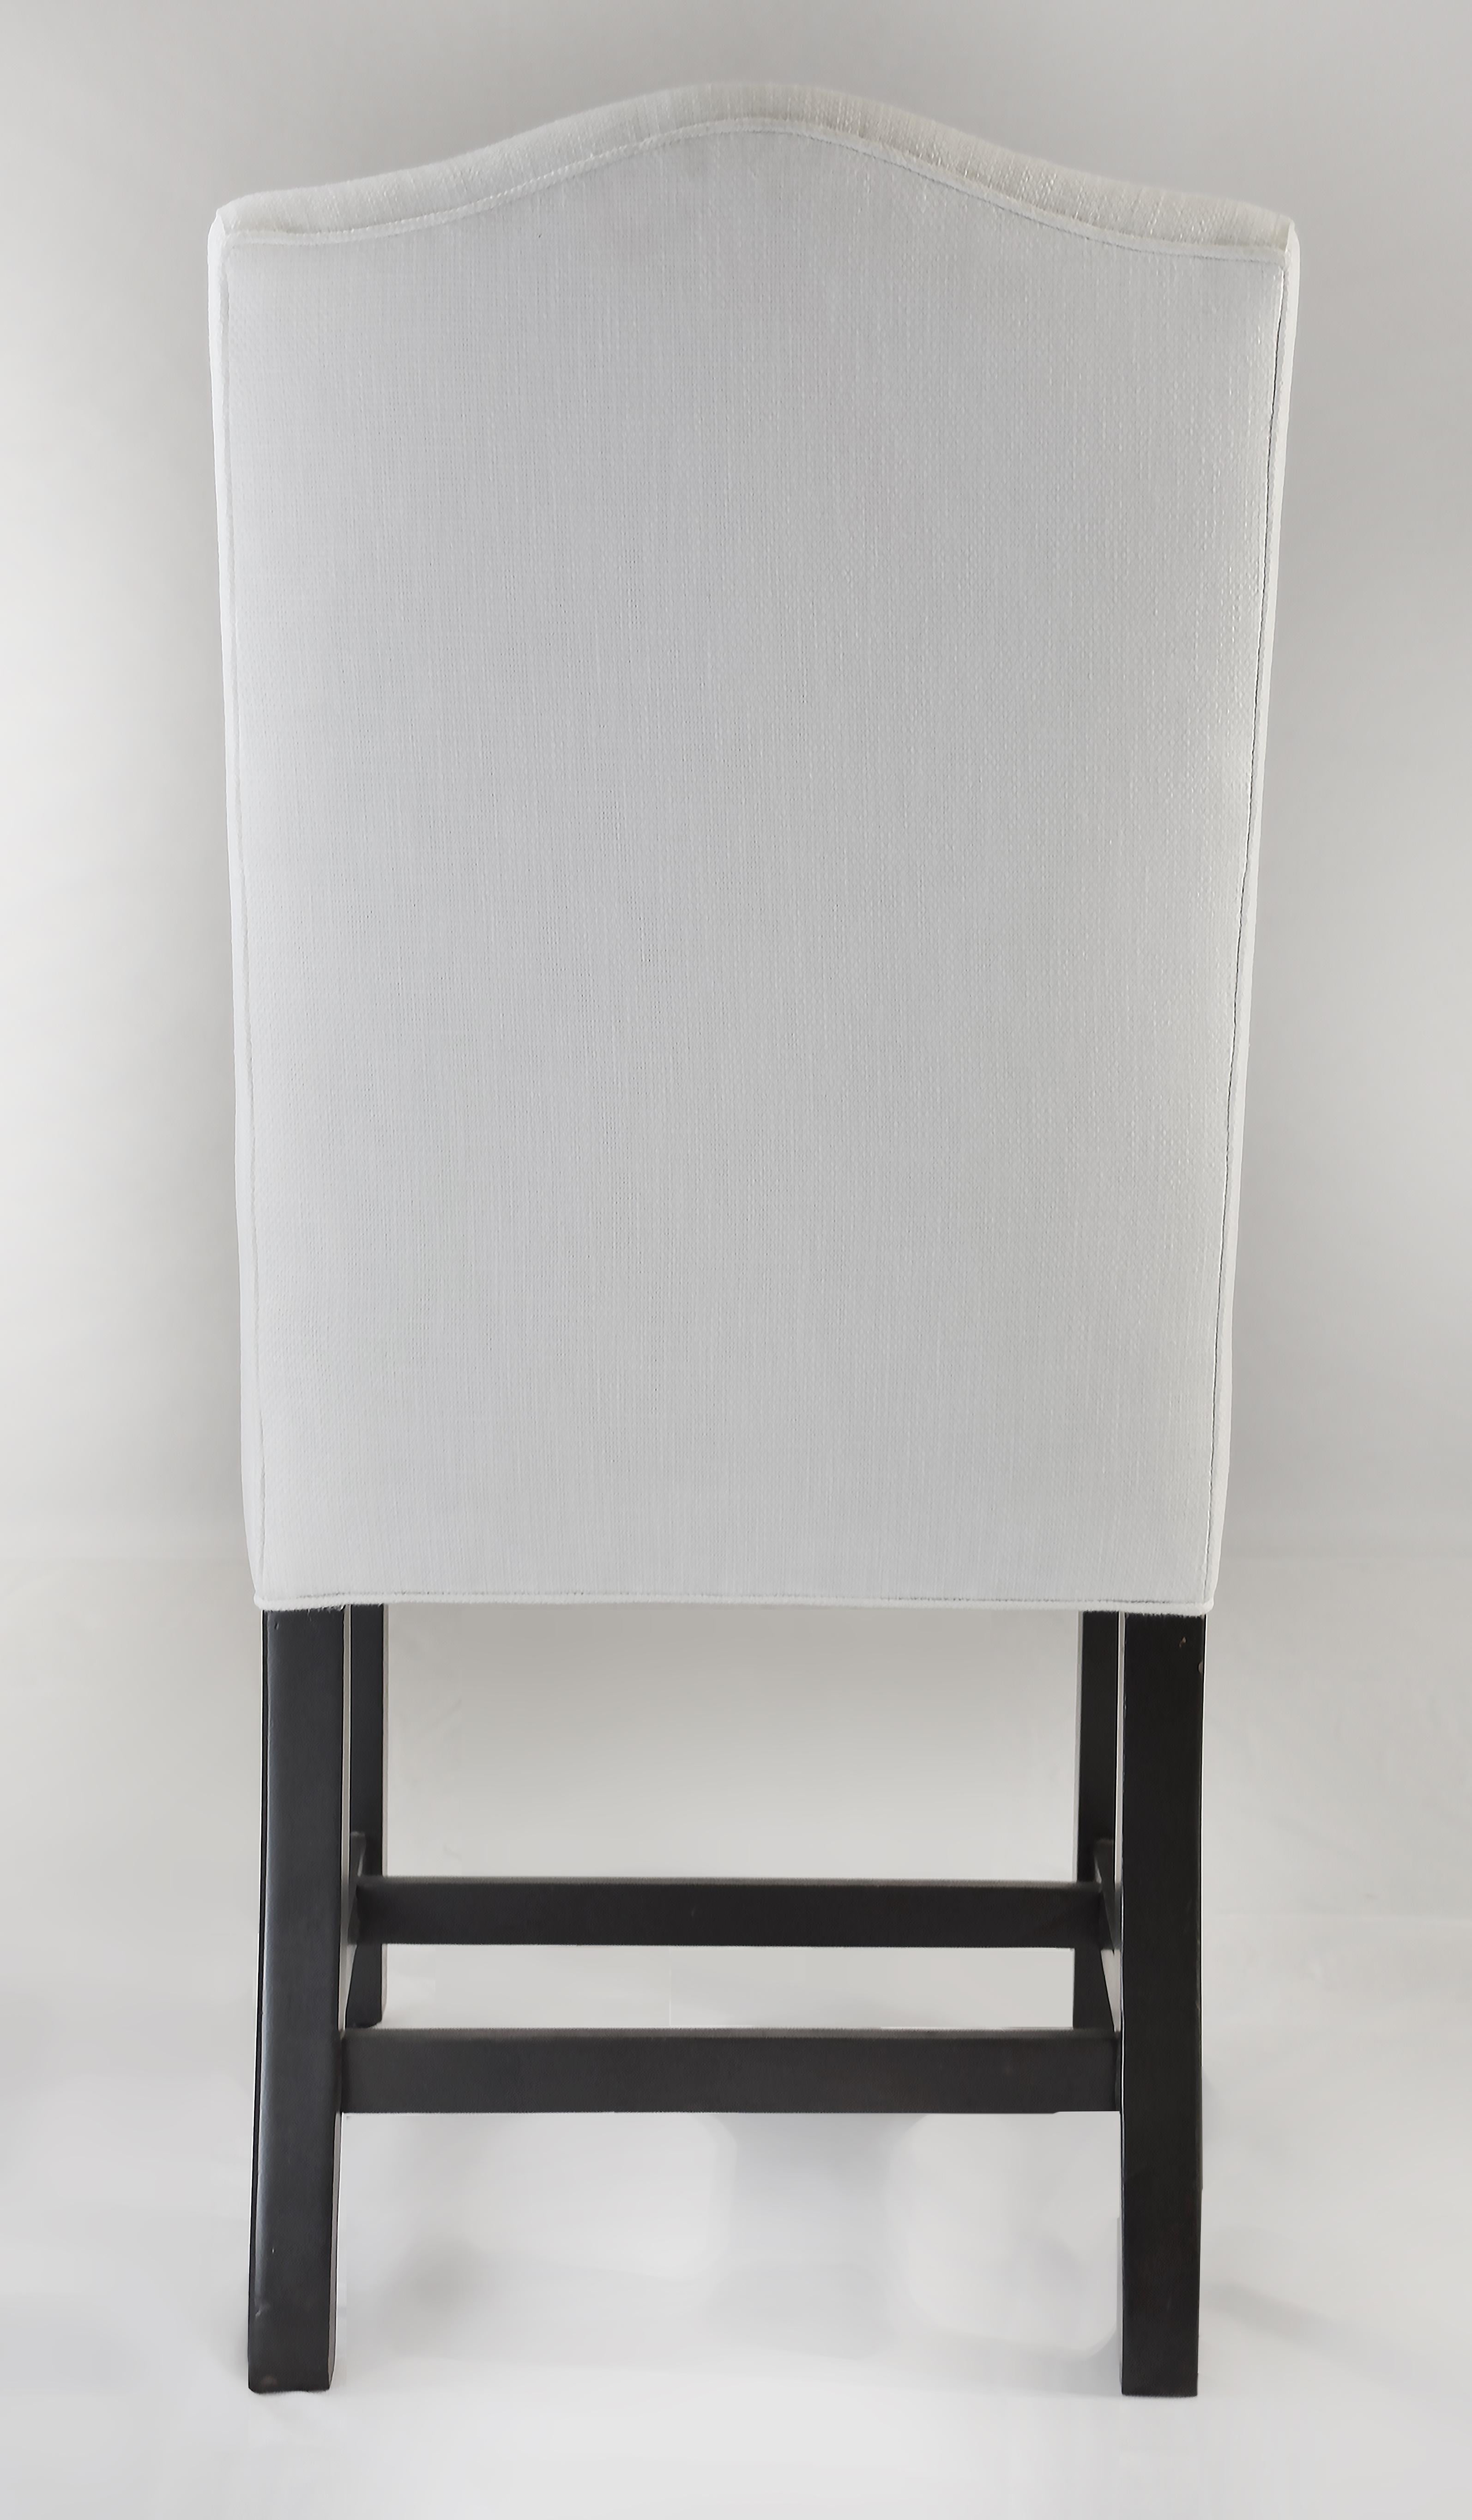 Le Jeune Upholstery Hampshire Armless Dining Side Chair DC1.923 Showroom Model In Good Condition For Sale In Miami, FL